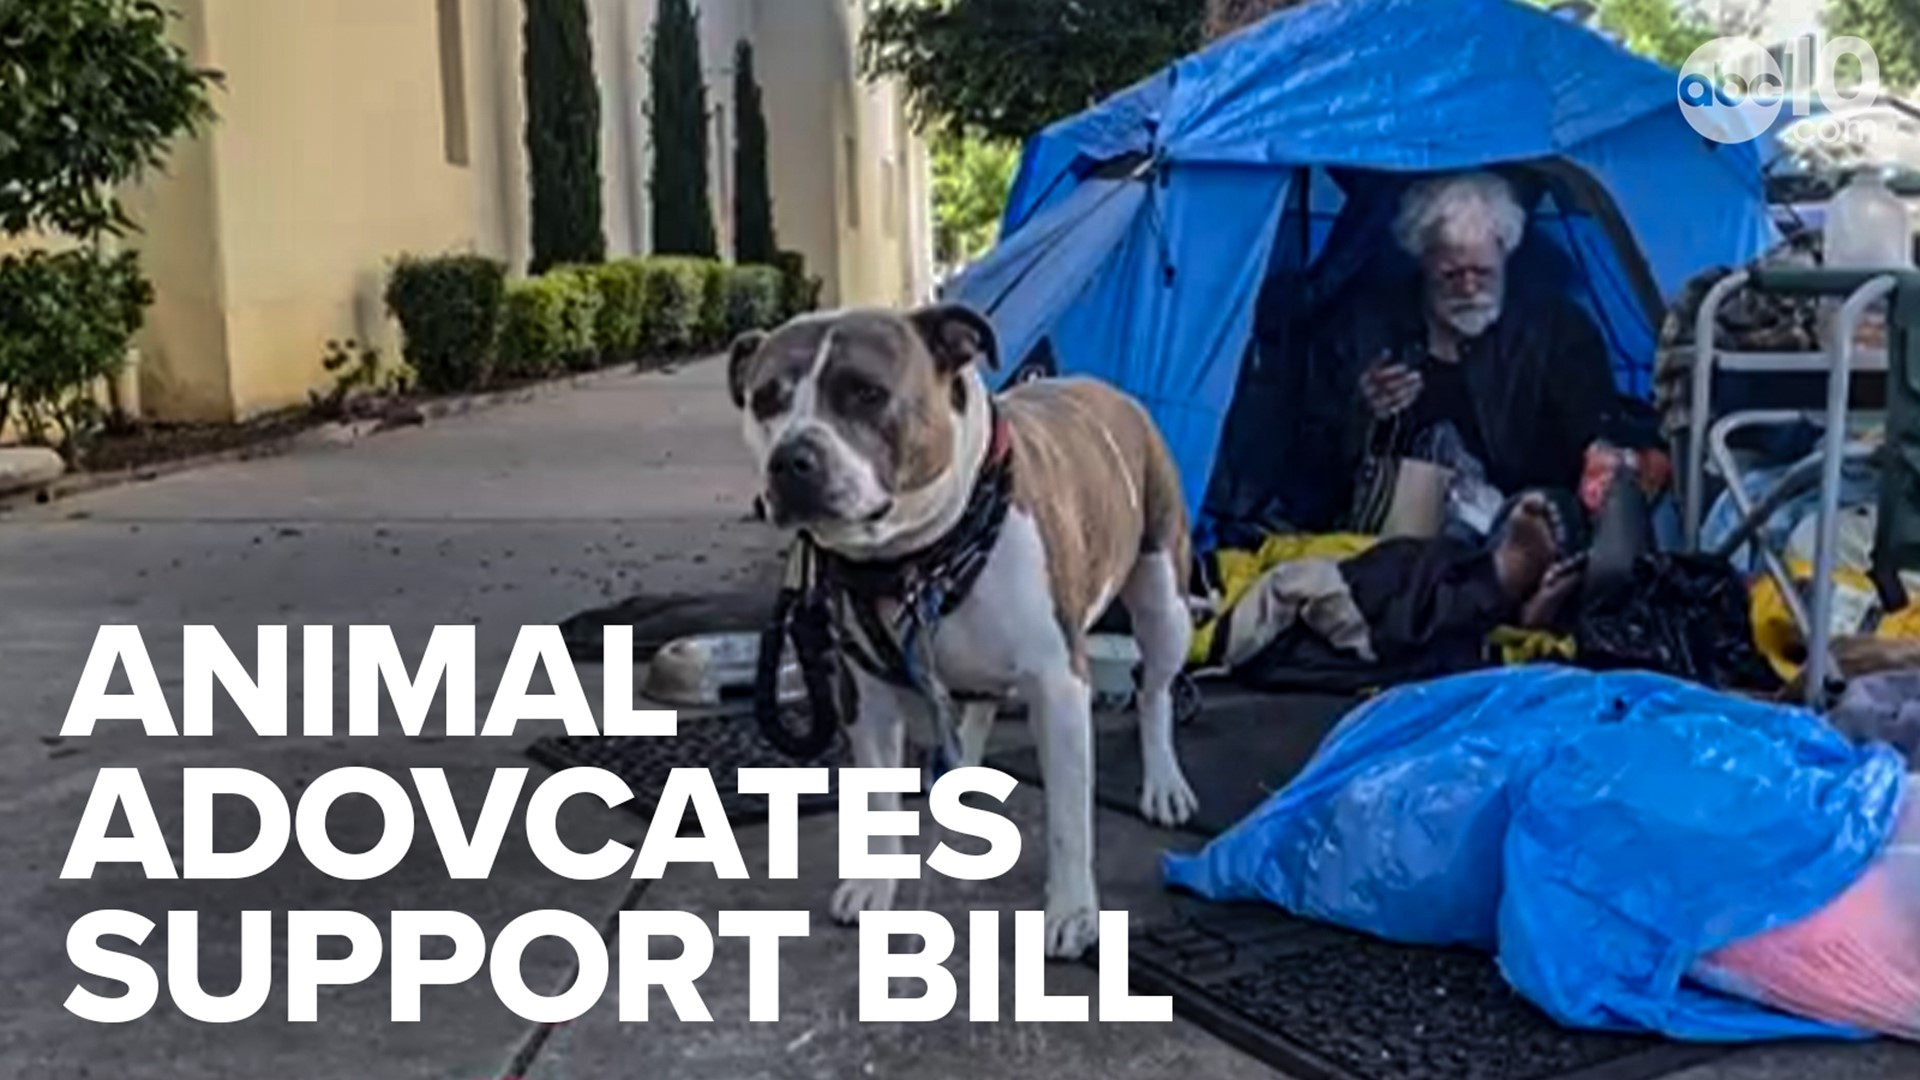 California lawmakers want $30 million to continue granting more funding for homeless shelters willing to accept pets who accompany residents.